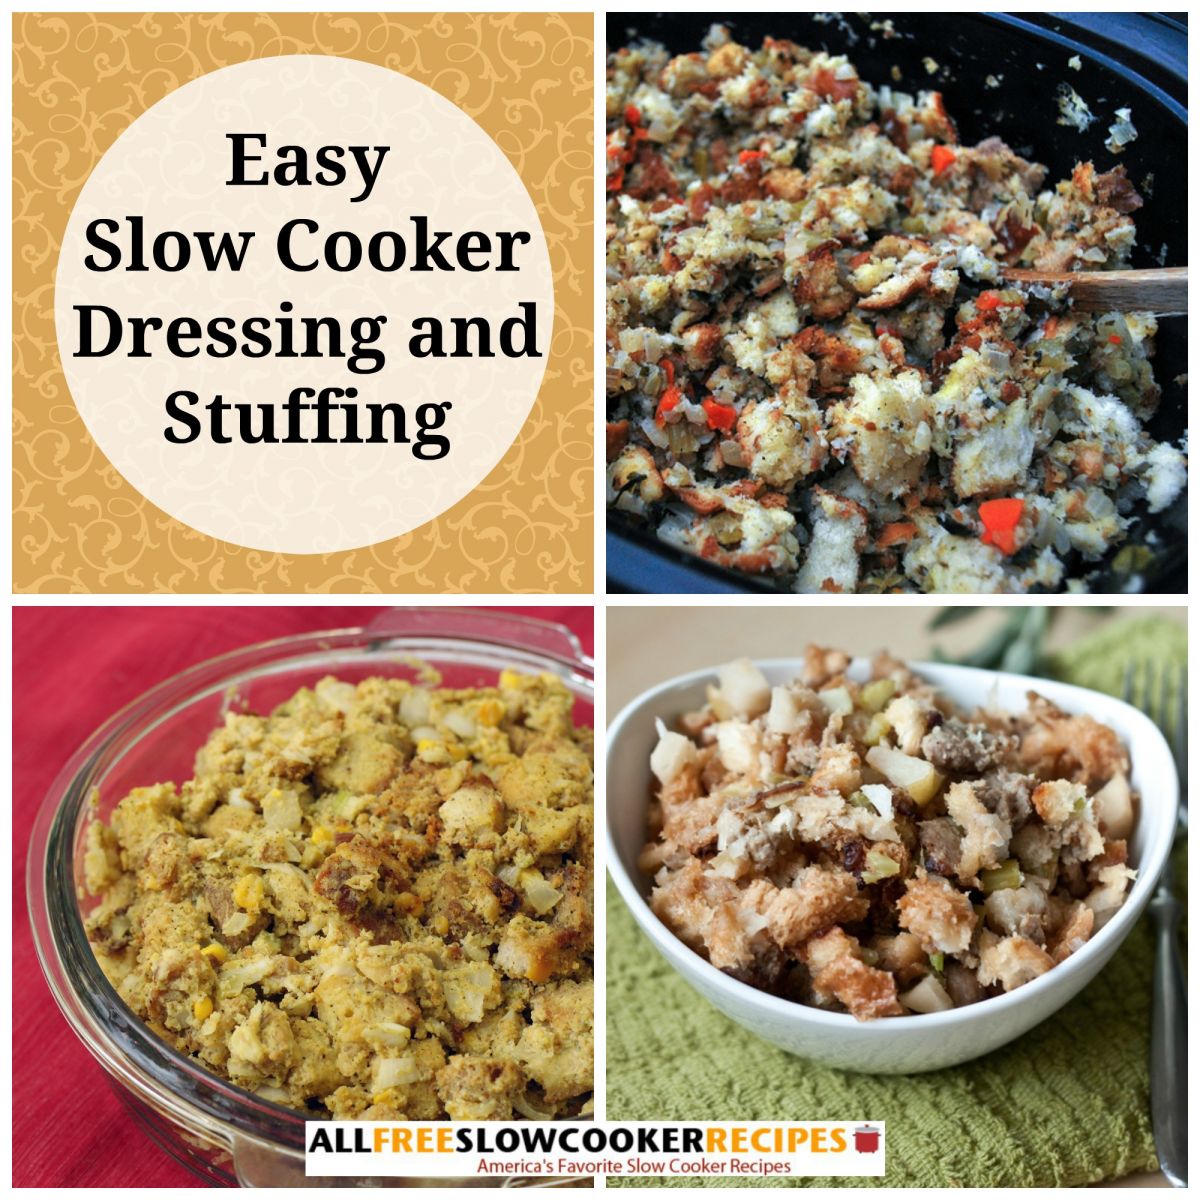 Slow Cooker Dressing and Stuffing: 22 Easy Slow Cooker Stuffing or Dressing Recipes